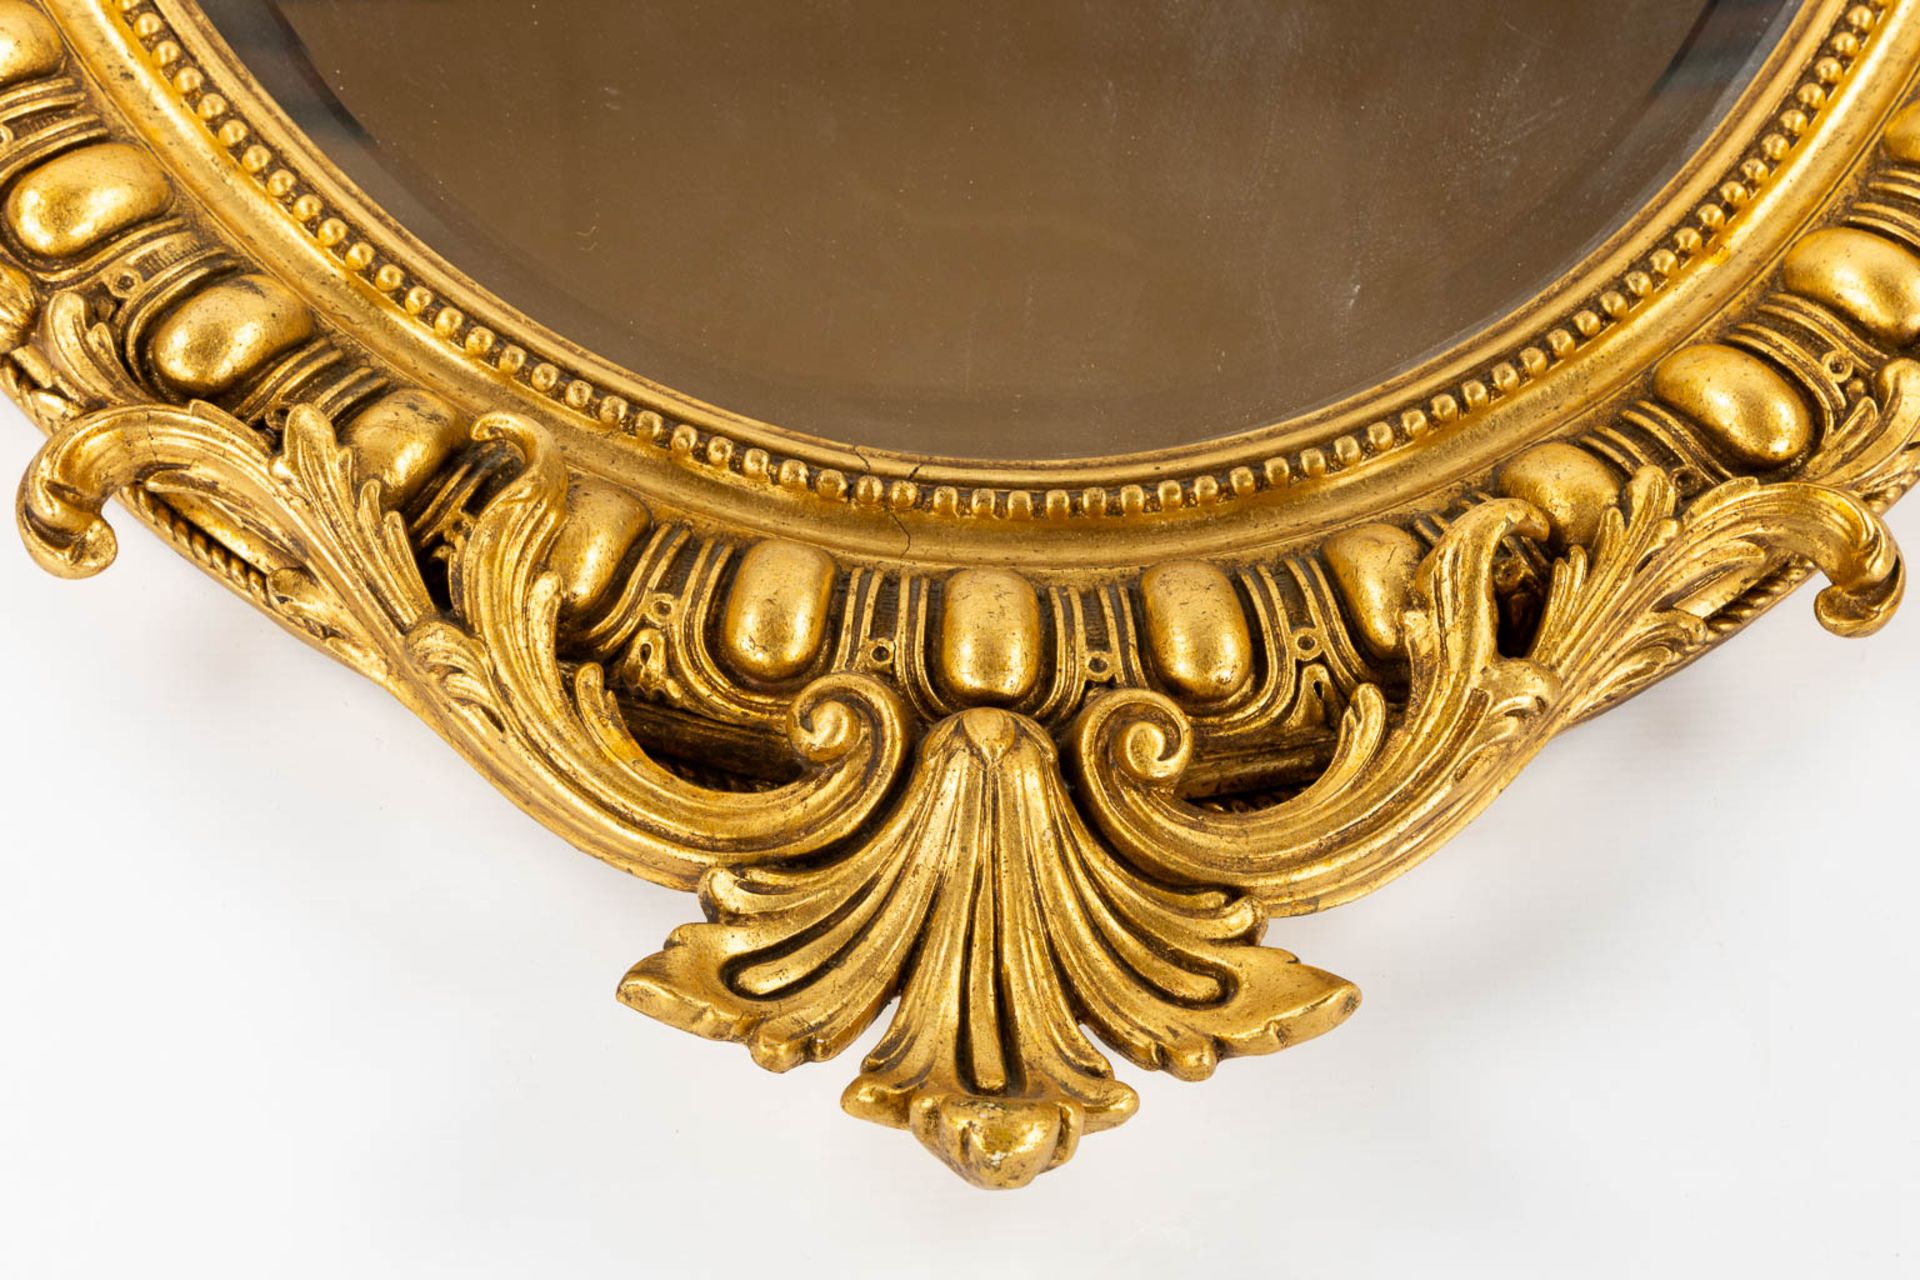 An antique mirror, gilt in a Louis XV style. 19th C. (W:89 x H:126 cm) - Image 4 of 8